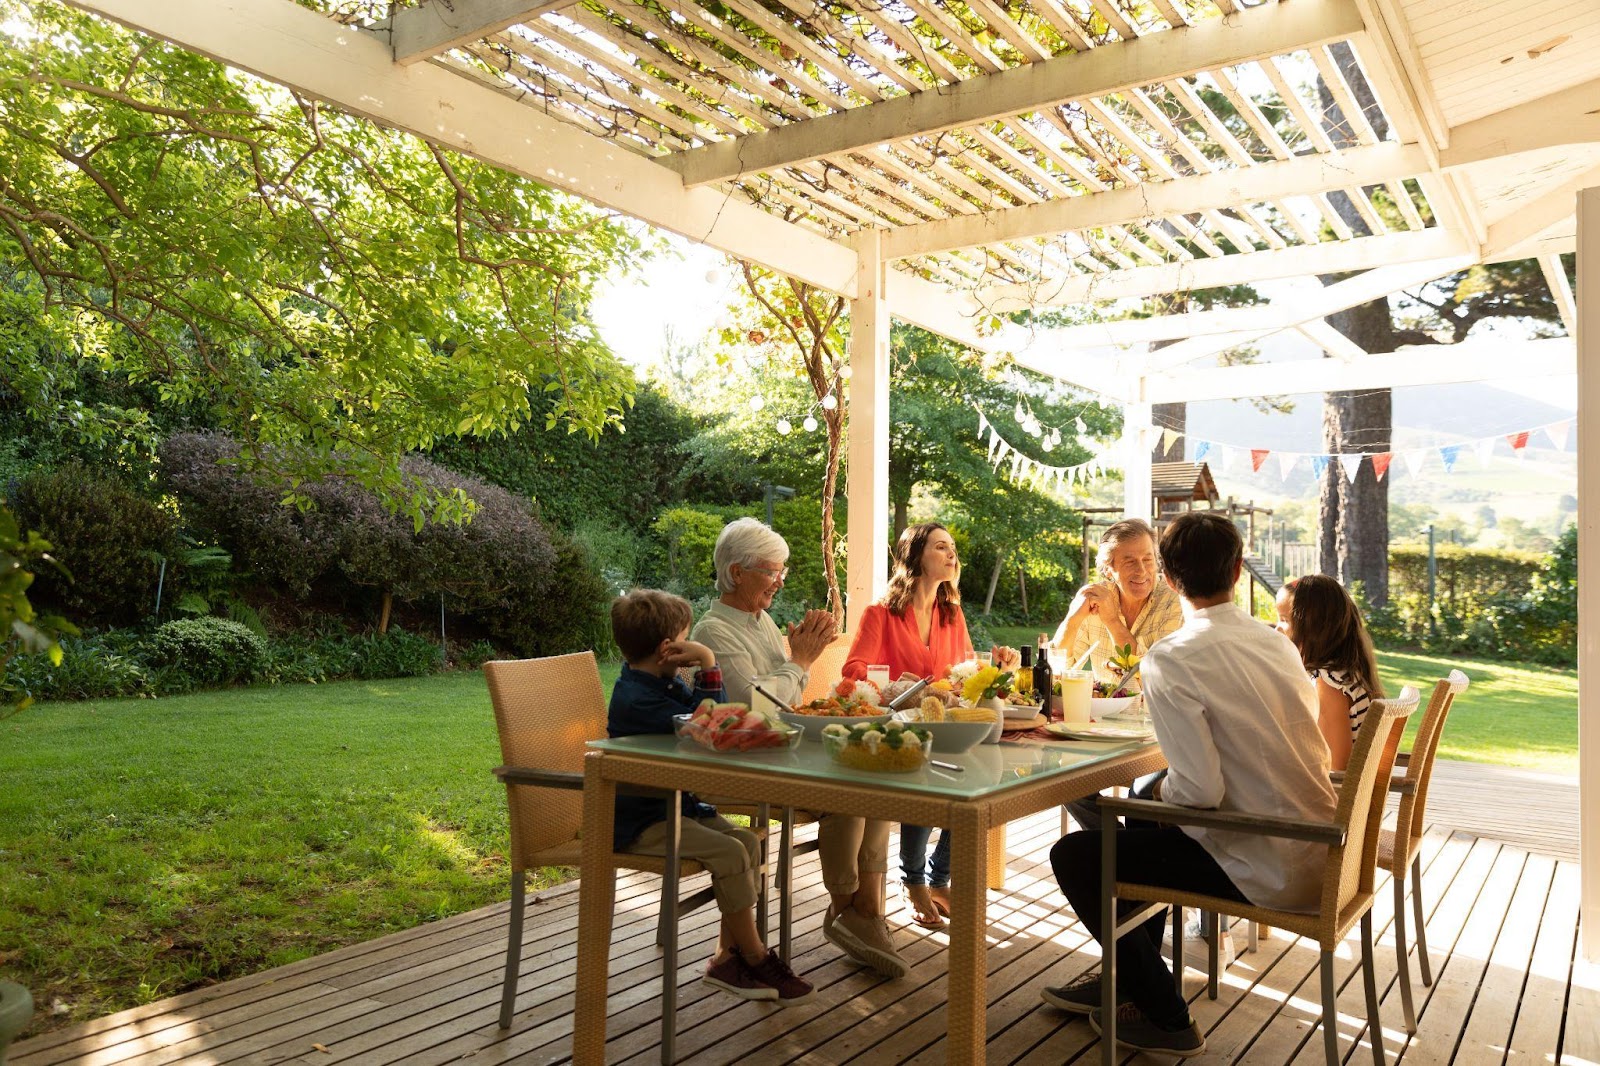 Family eating together outdoor on a wooden patio.